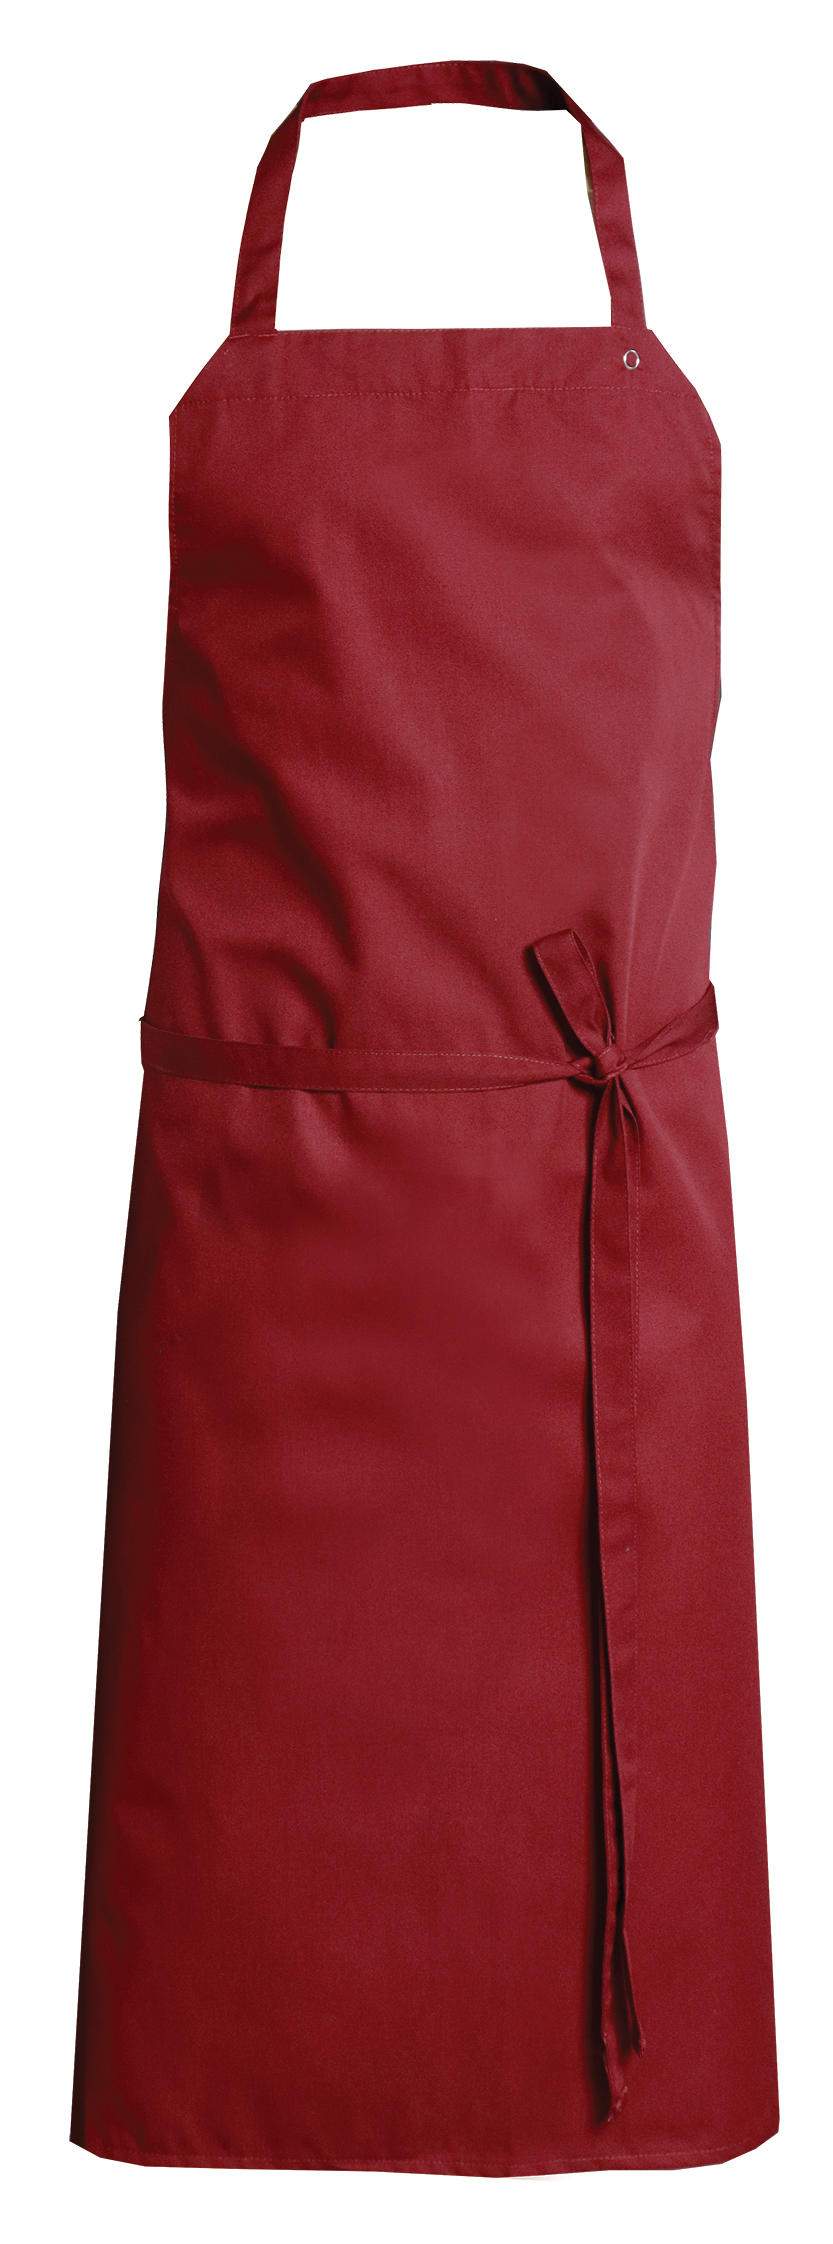 Bordeaux Apron without pocket, All-over (6100399)